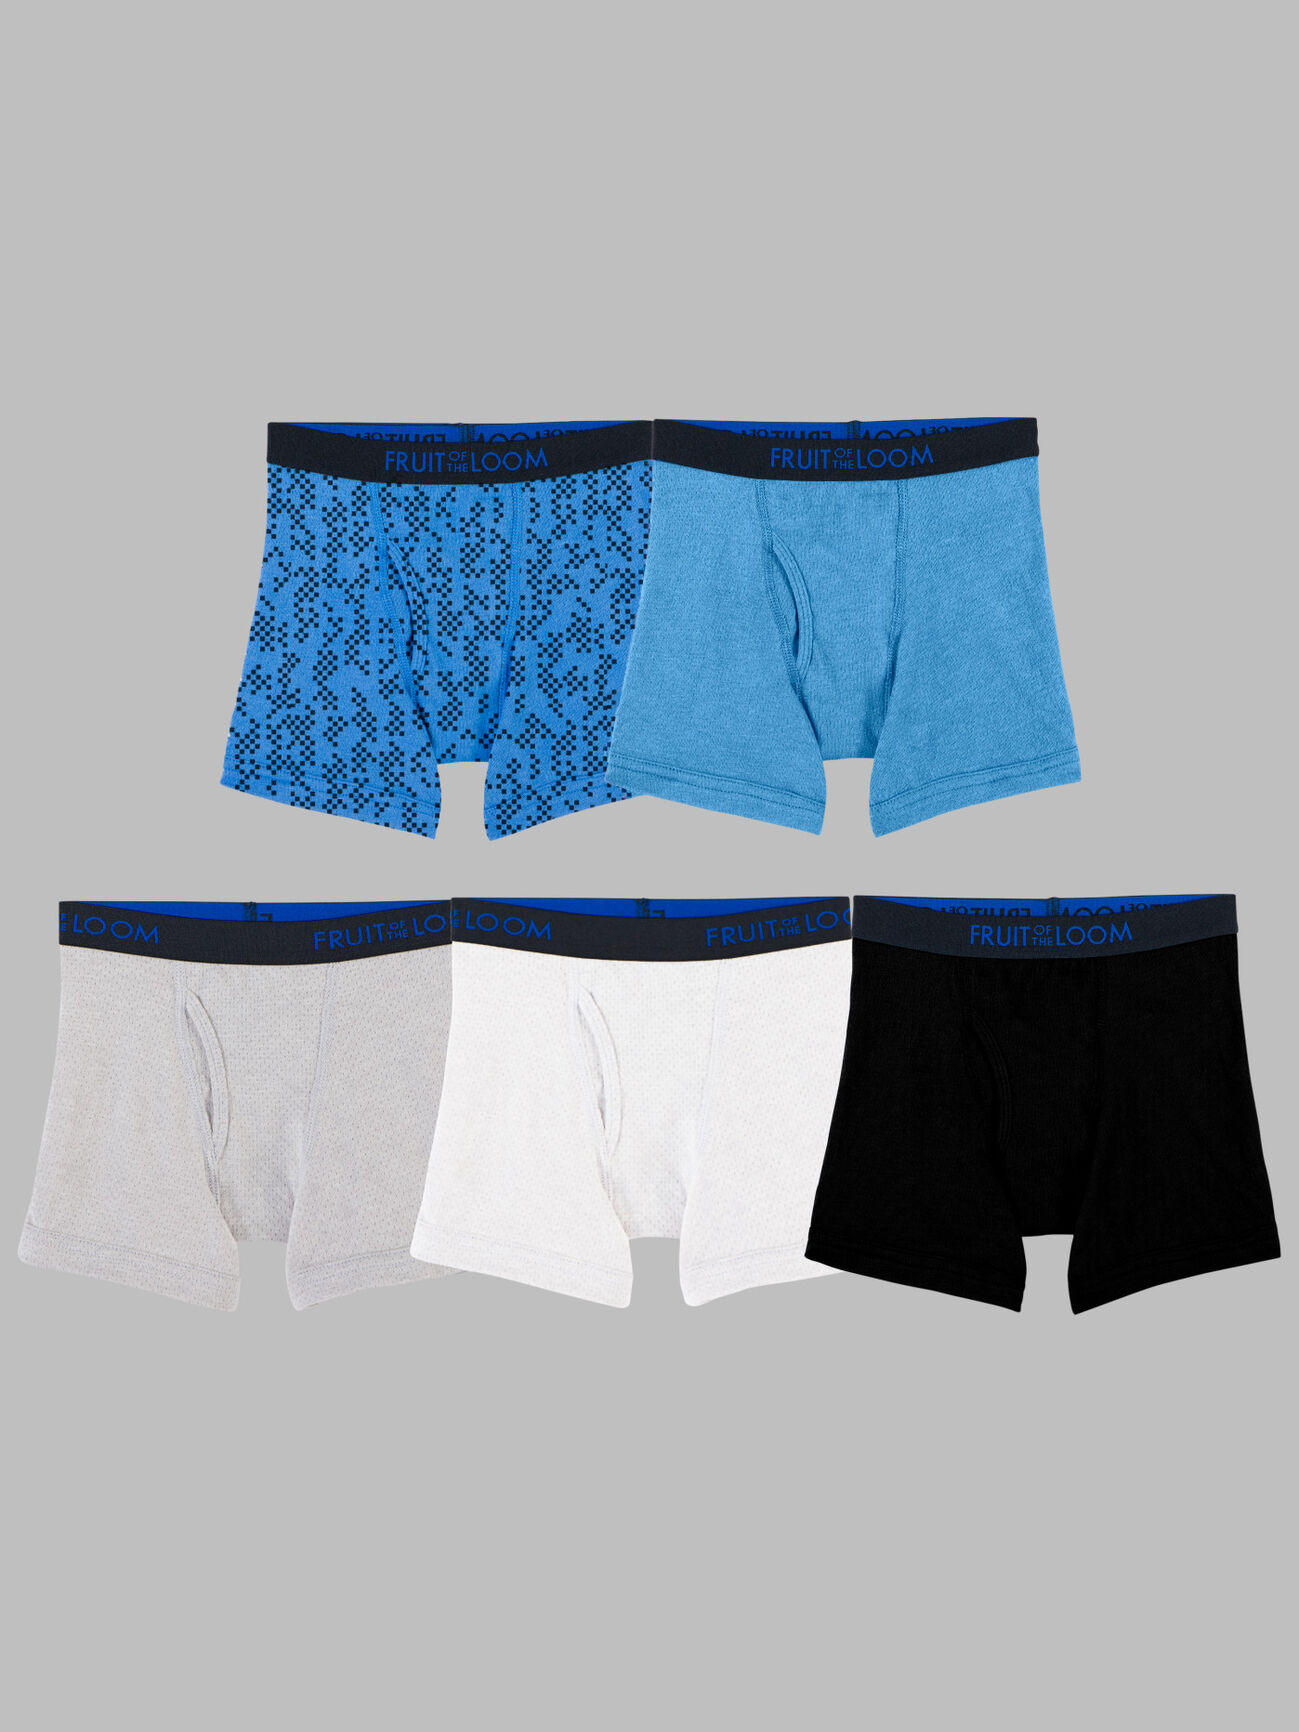 Fruit of the Loom Boys Boxer Briefs, 5-Pack 